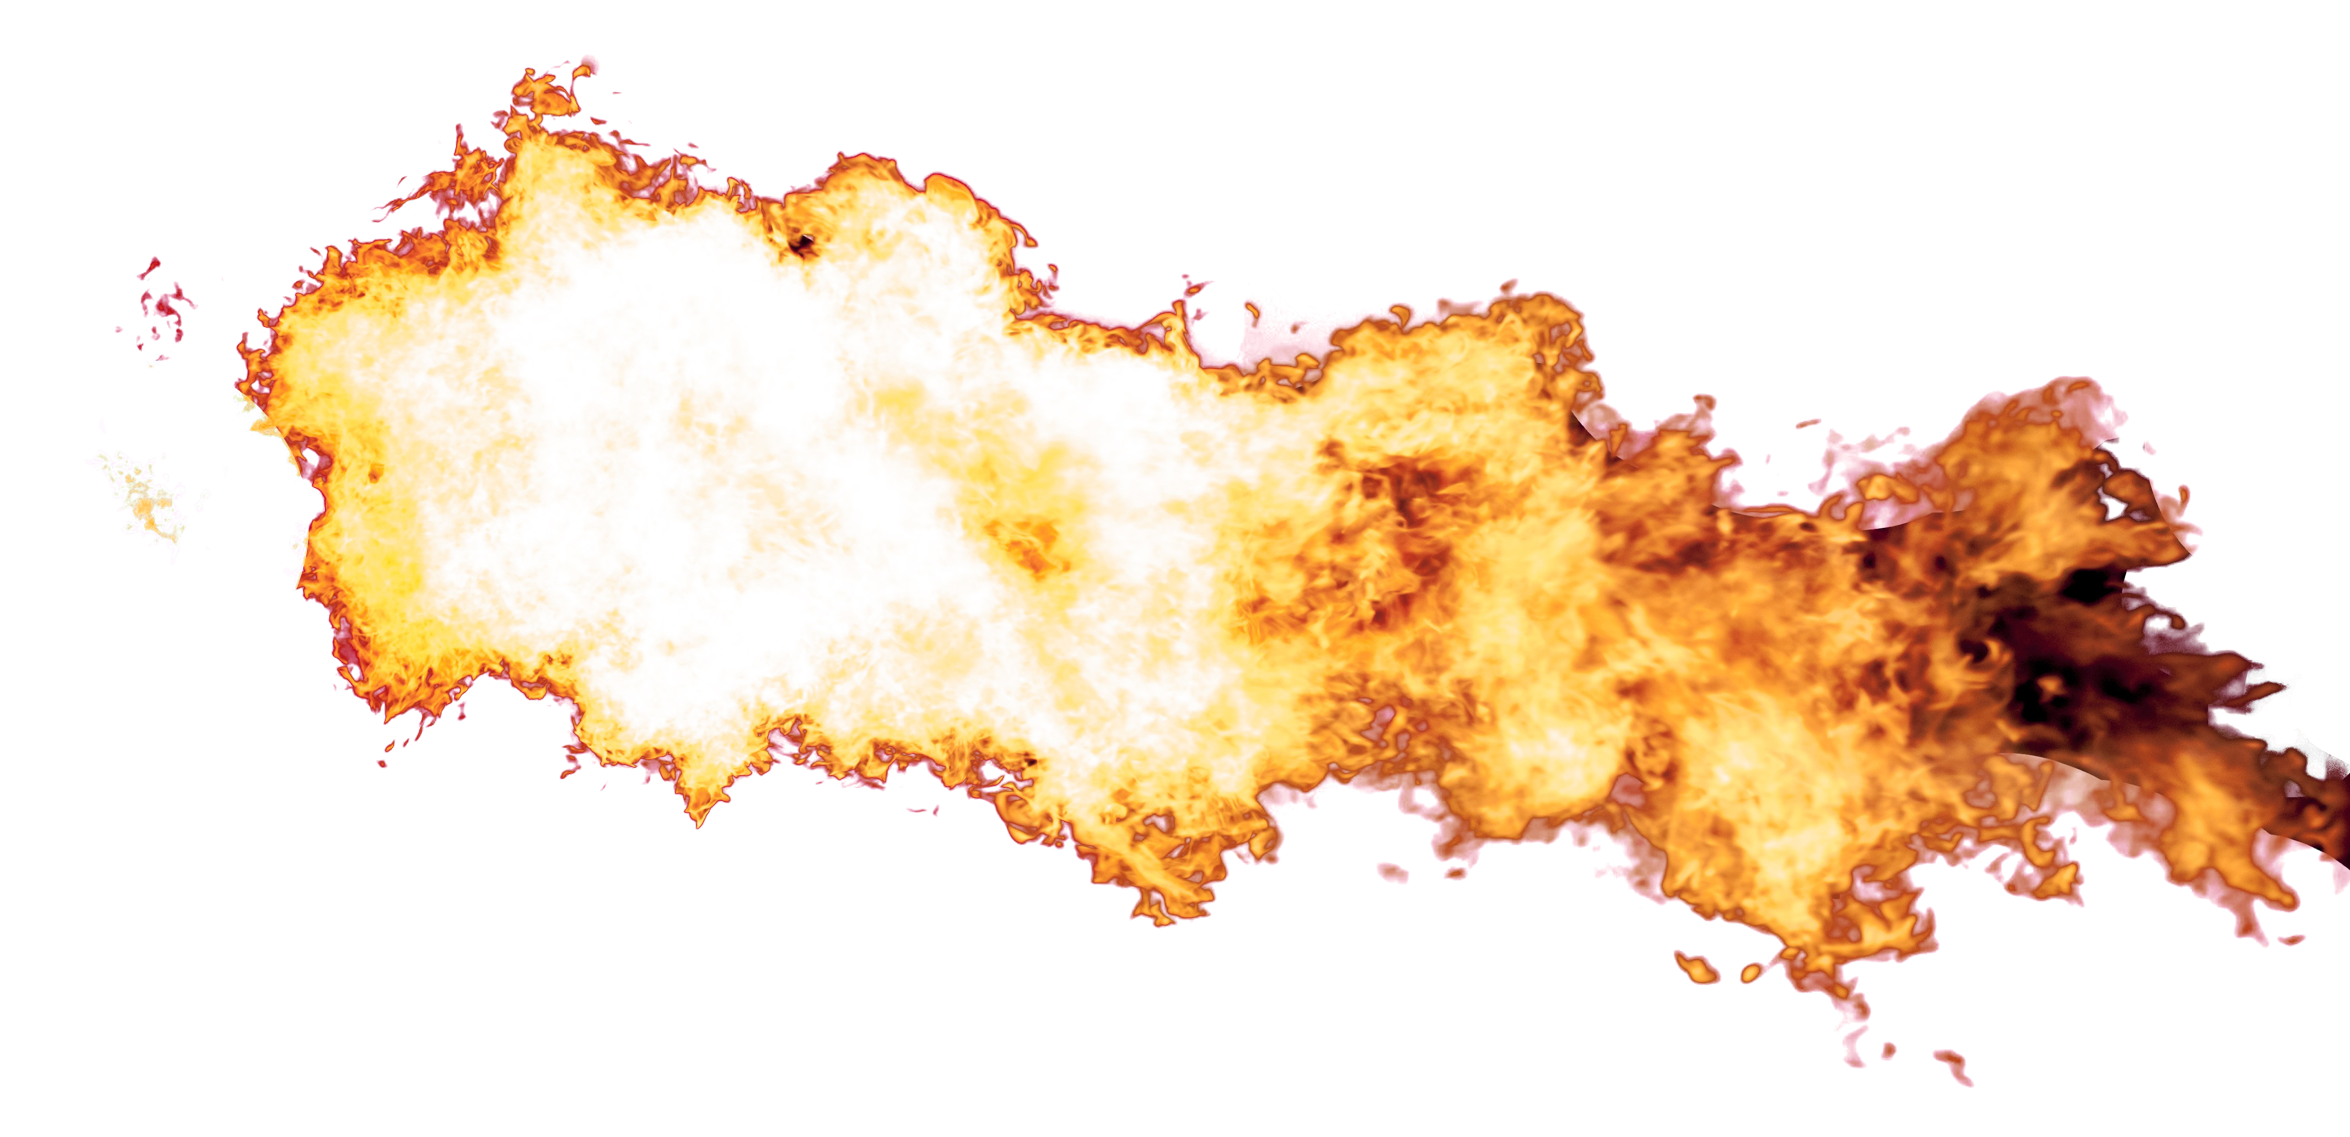 Fire png image purepng. Flame clipart single flame